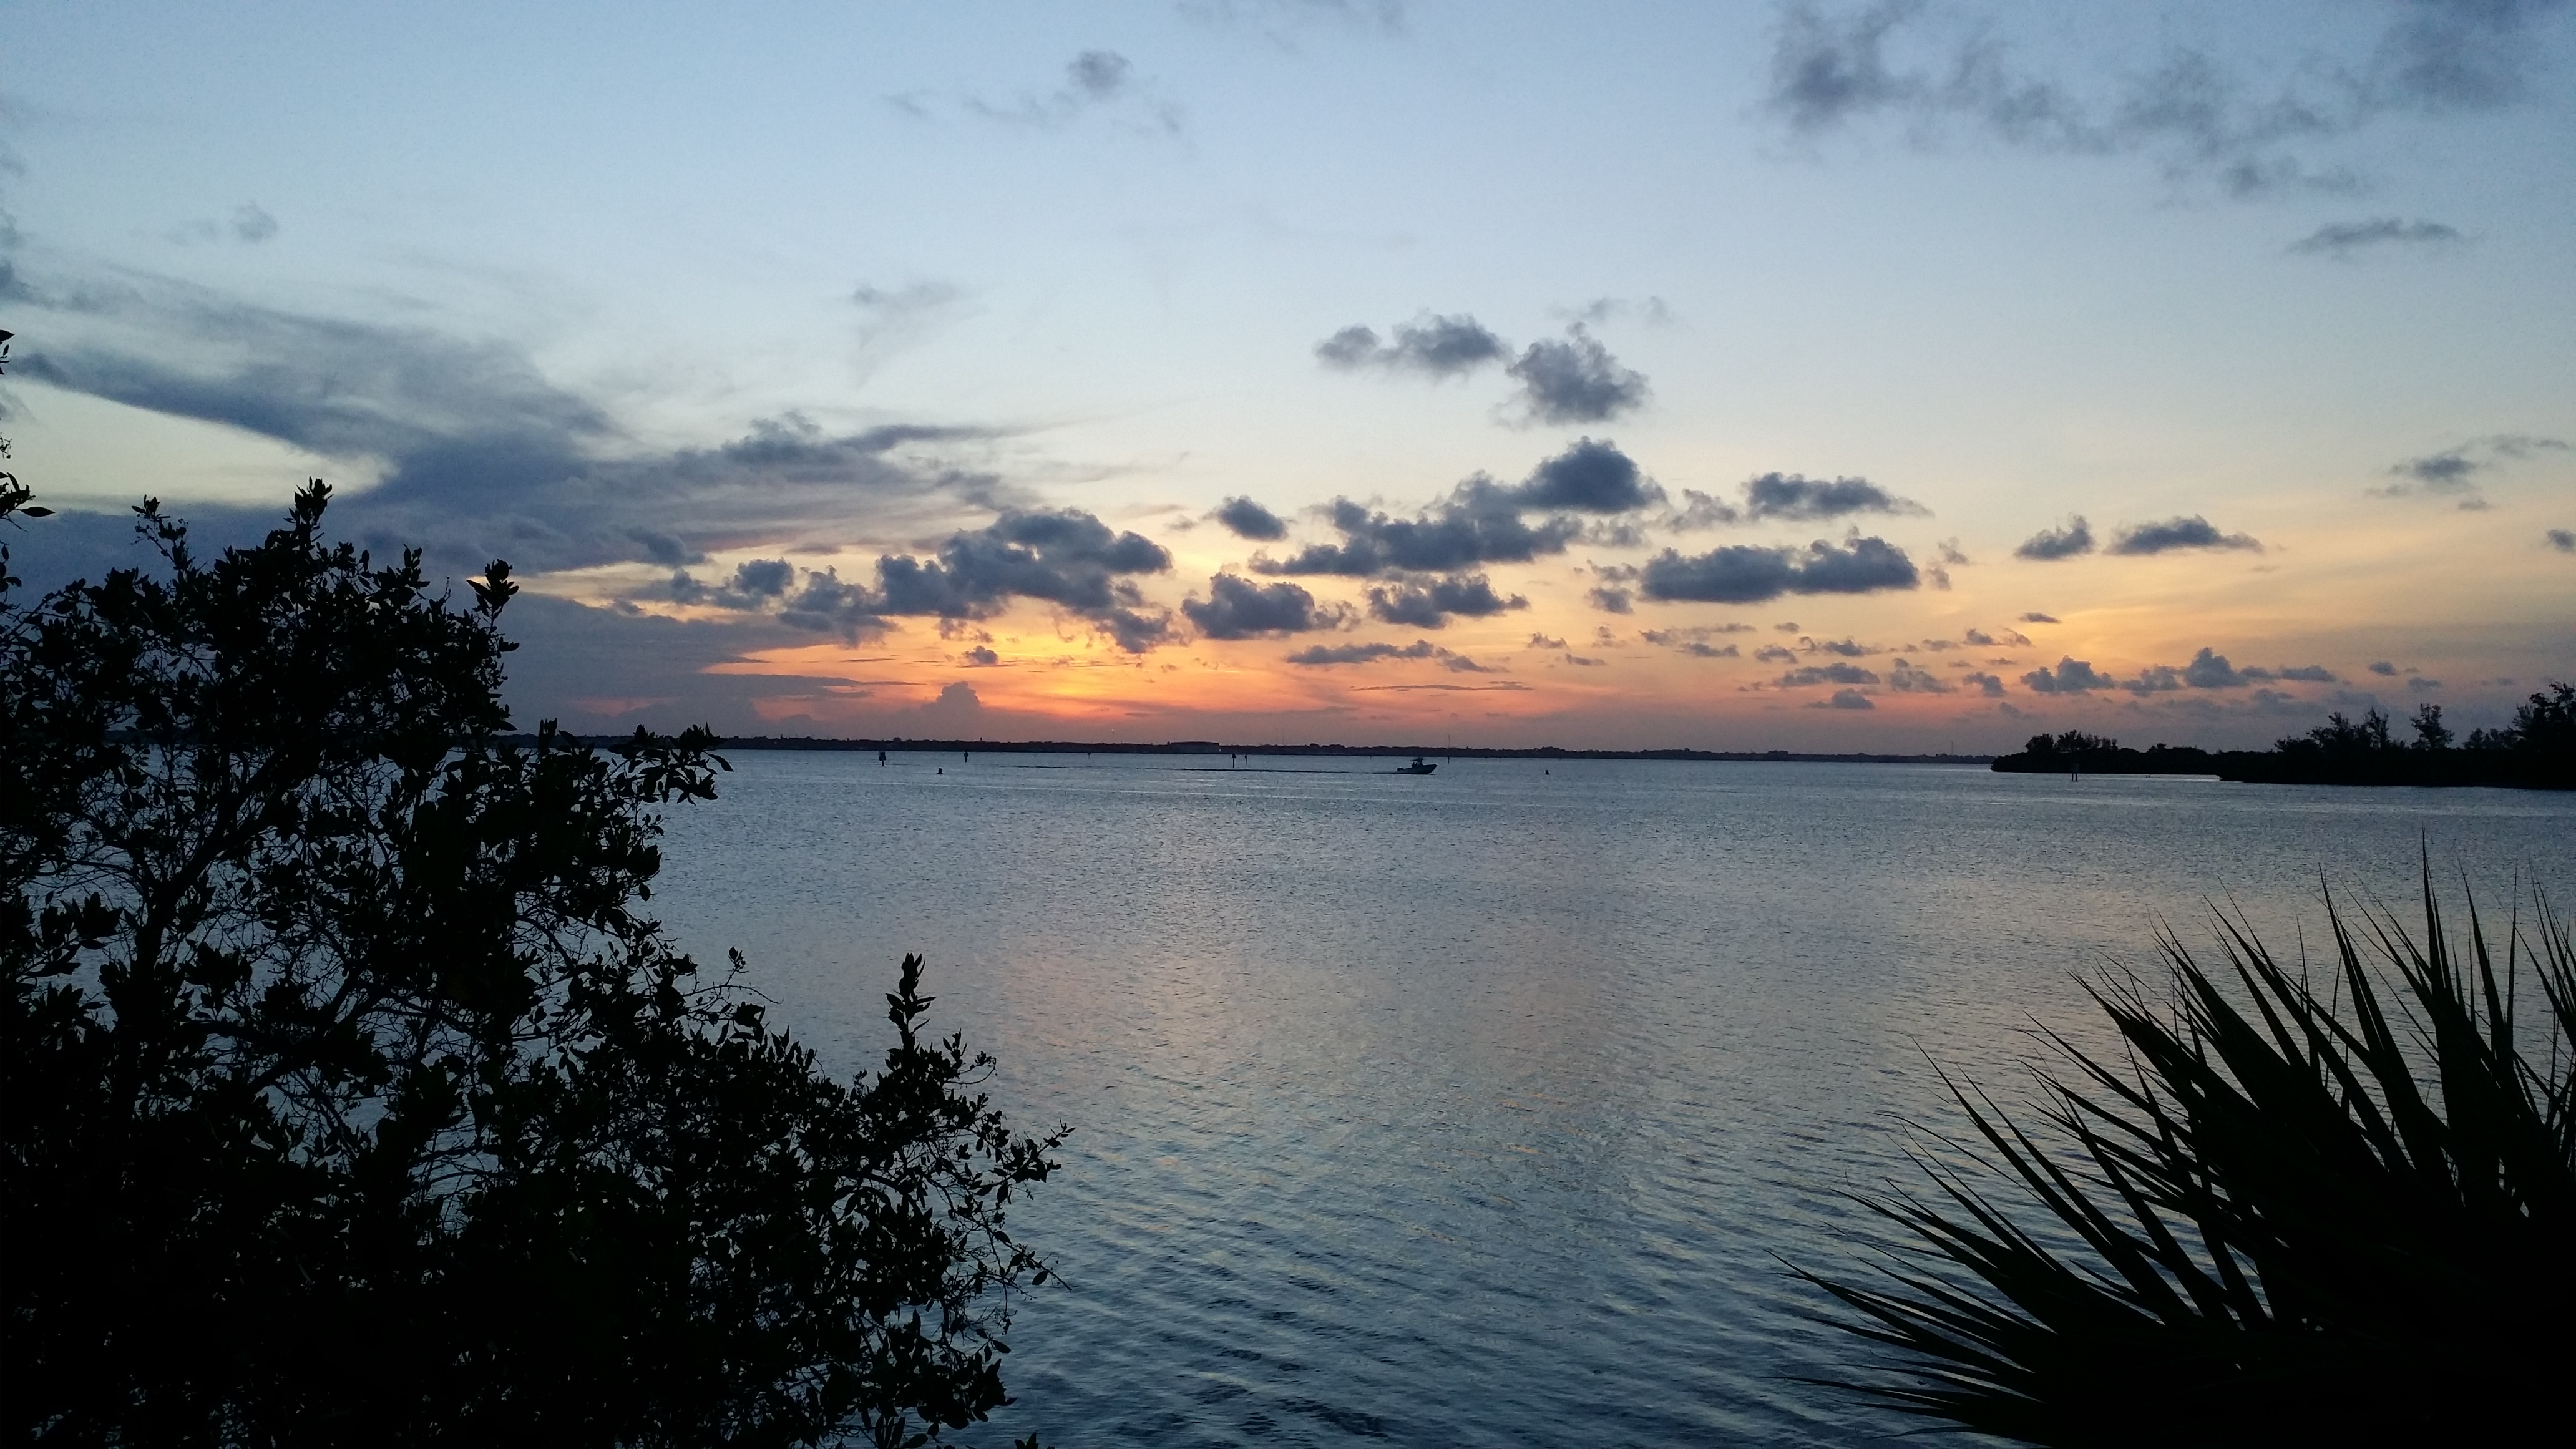 Sunset at the Indian River Lagoon